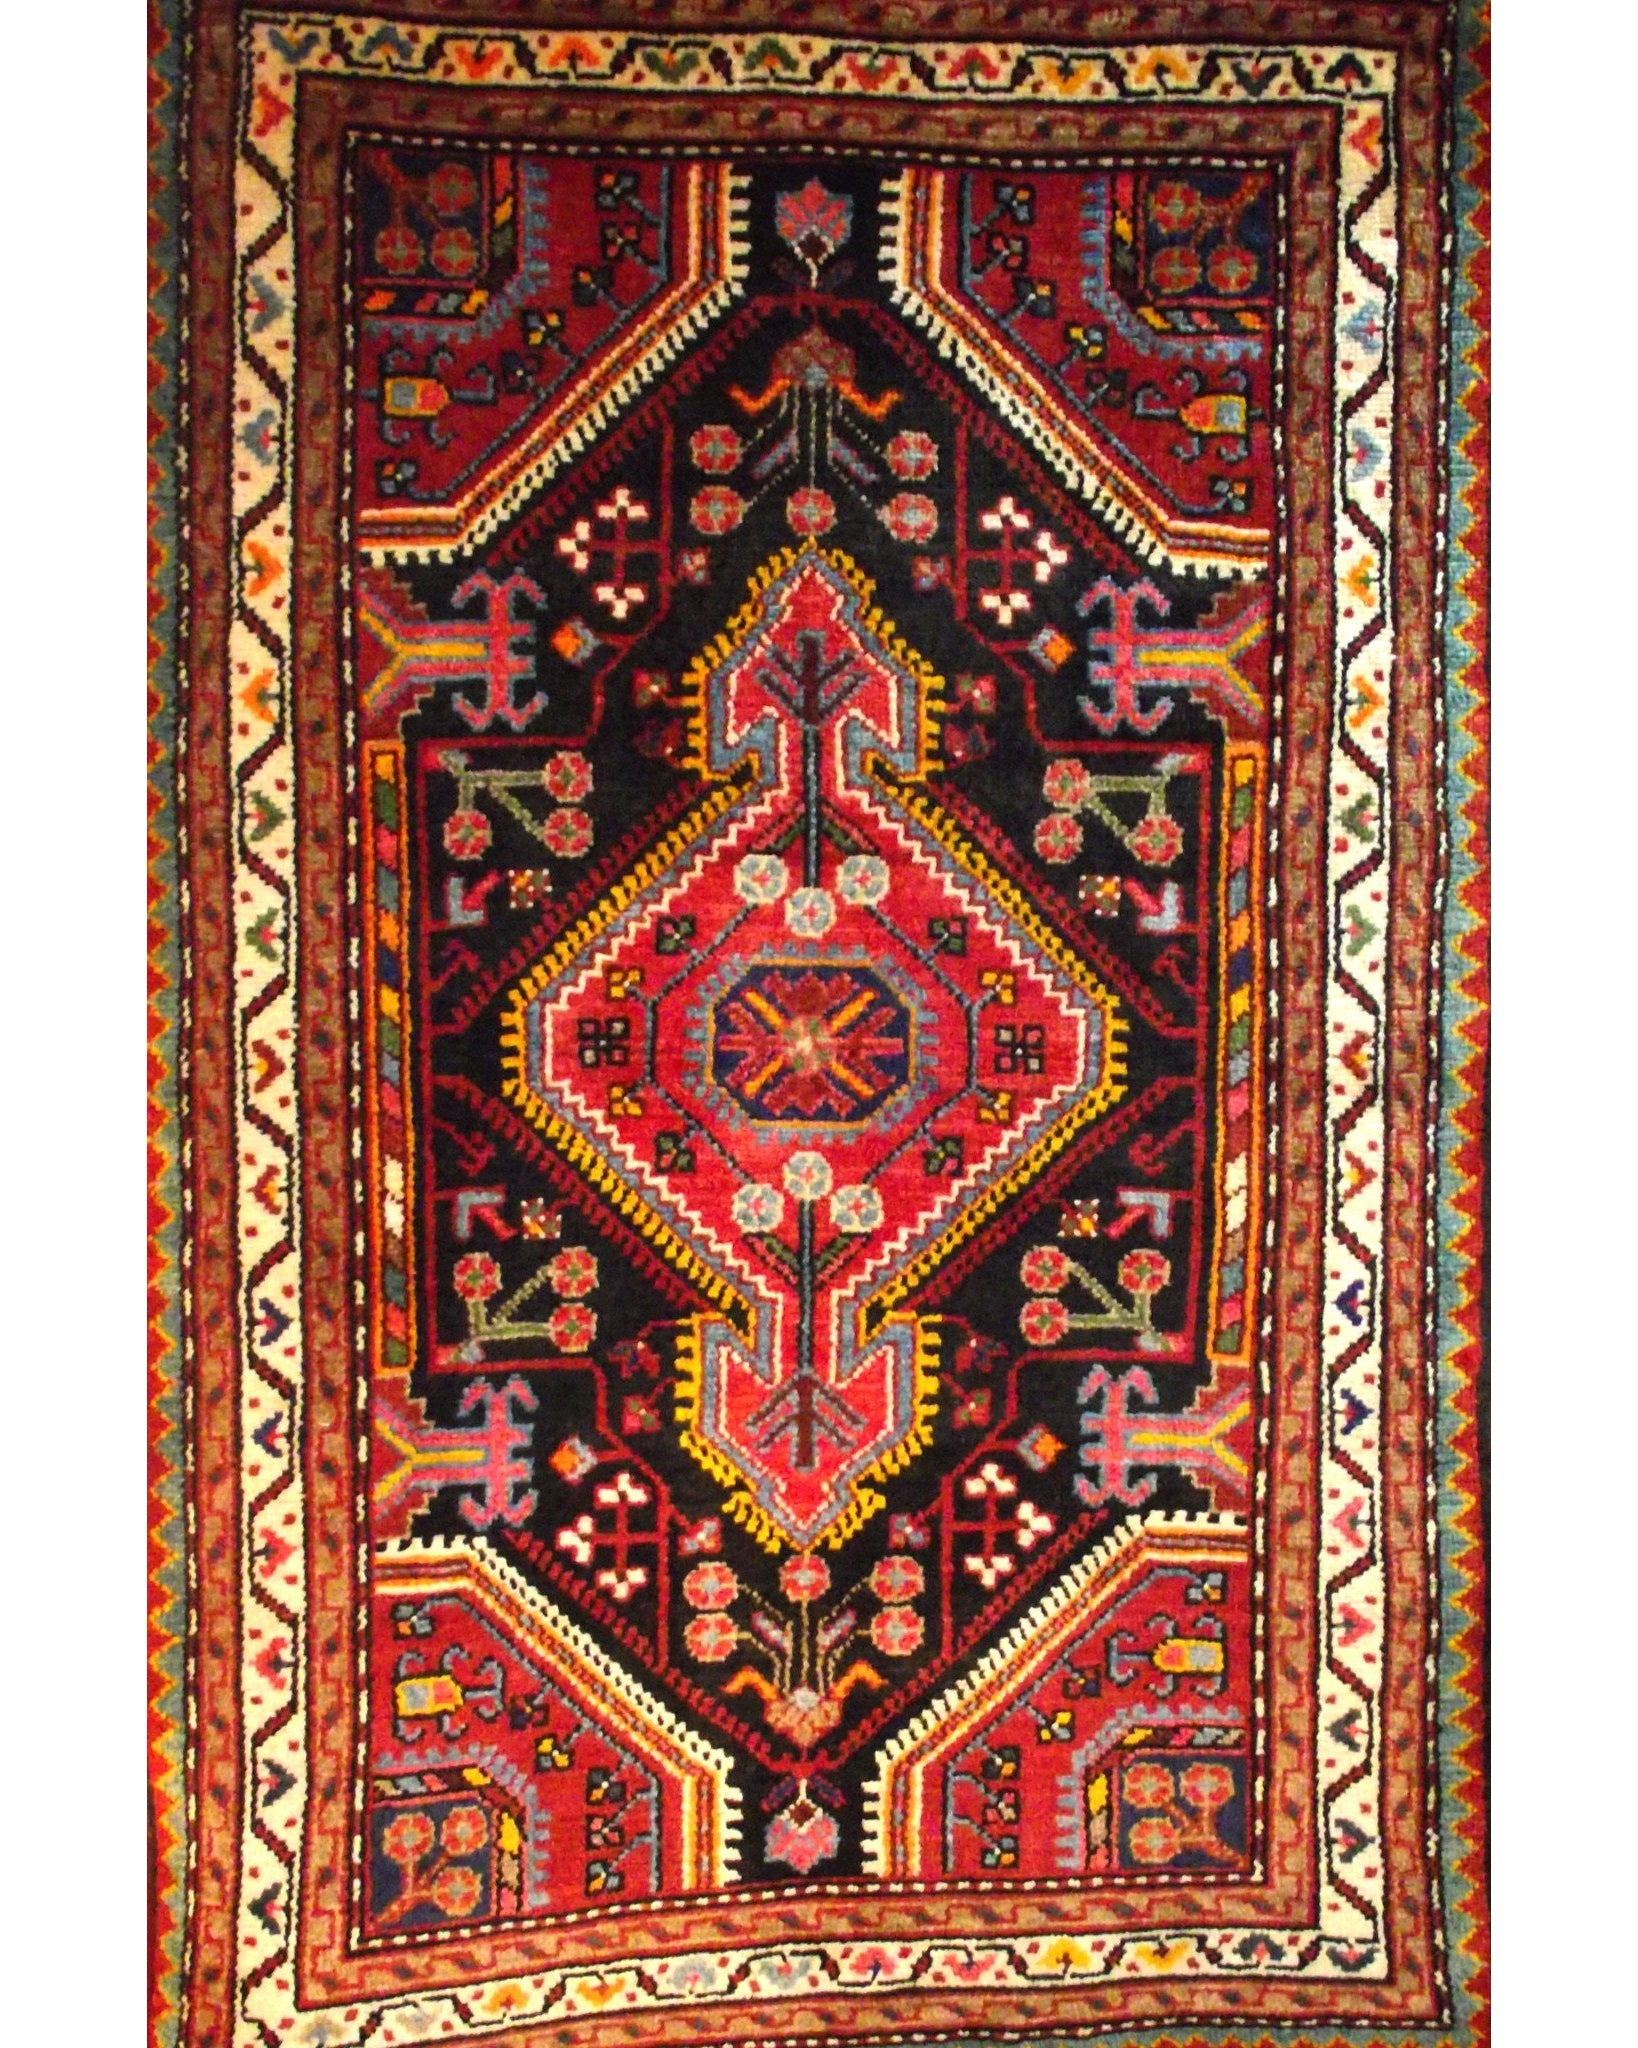 Area rug for living space and any room. Floor decor, rugs and carpets from Tabrizi Rugs. Hamadan 105 - 2'6